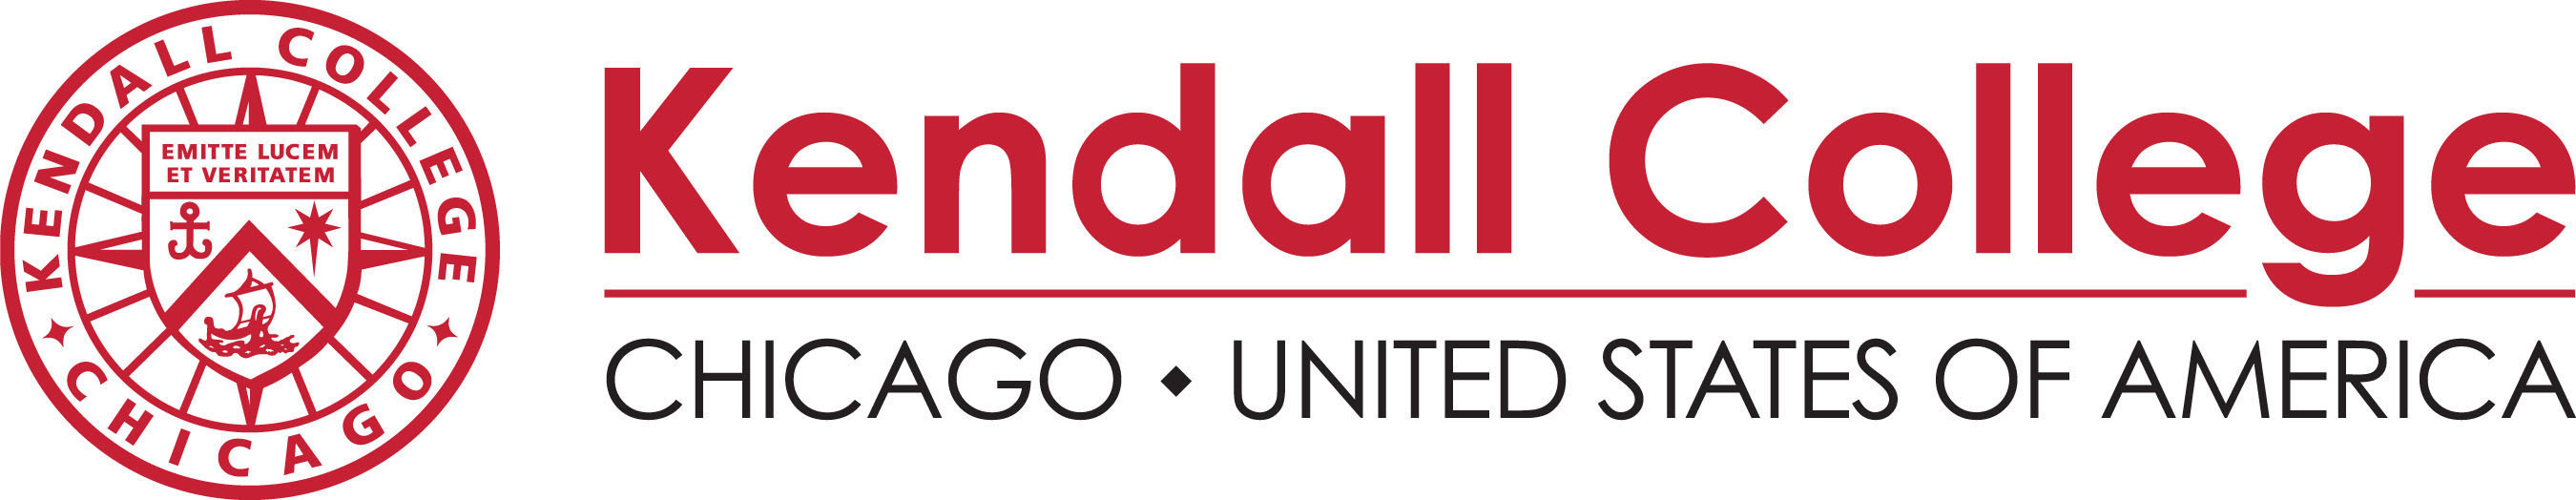 Kendall College logo